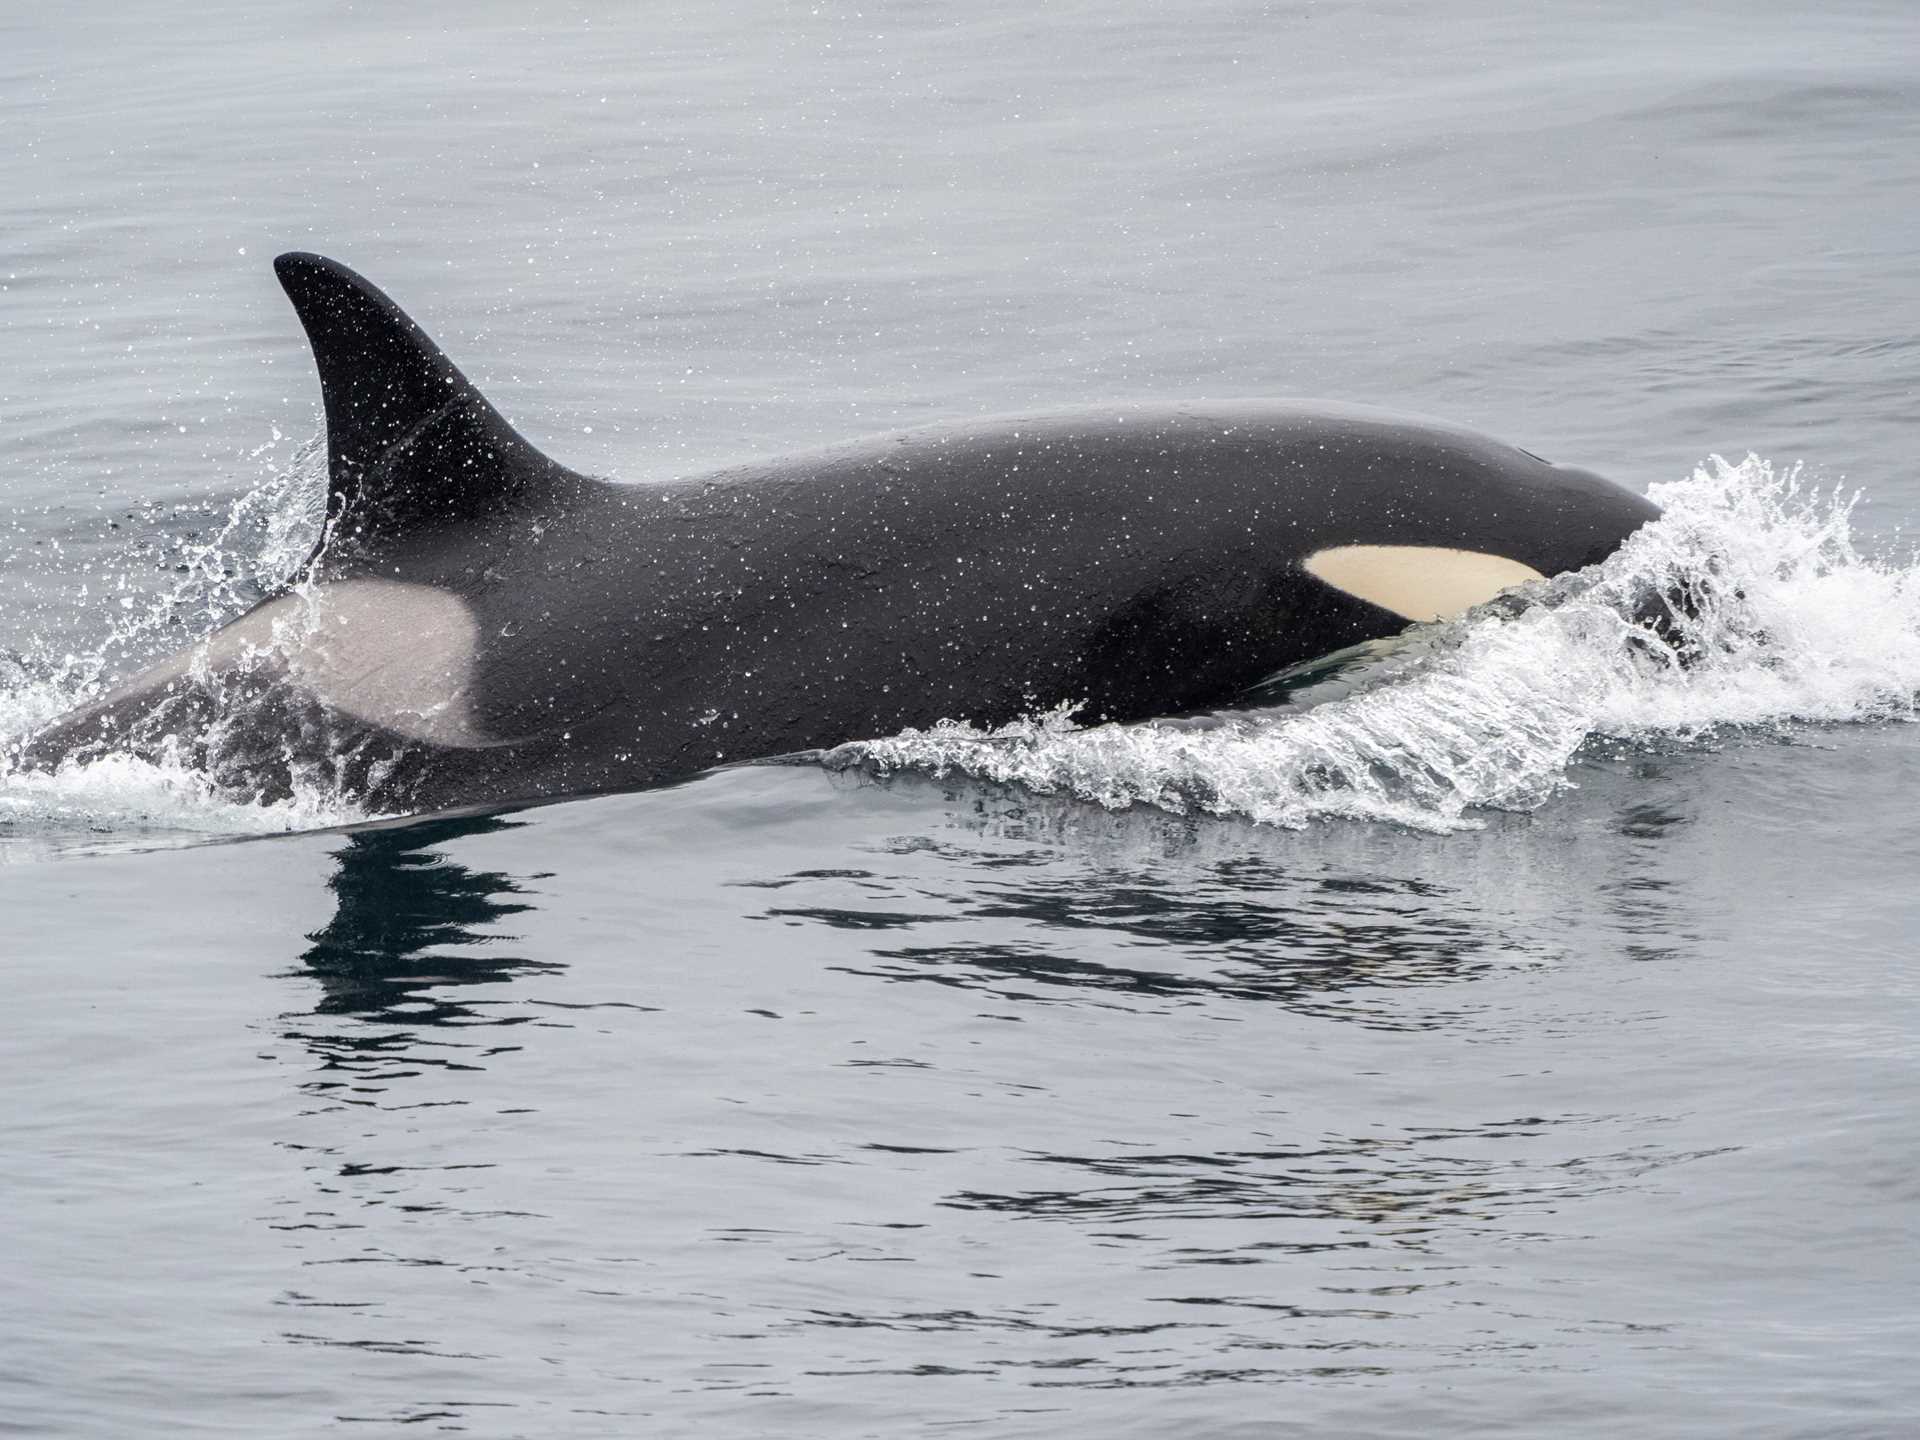 A killer whale in Svalbard, Norway